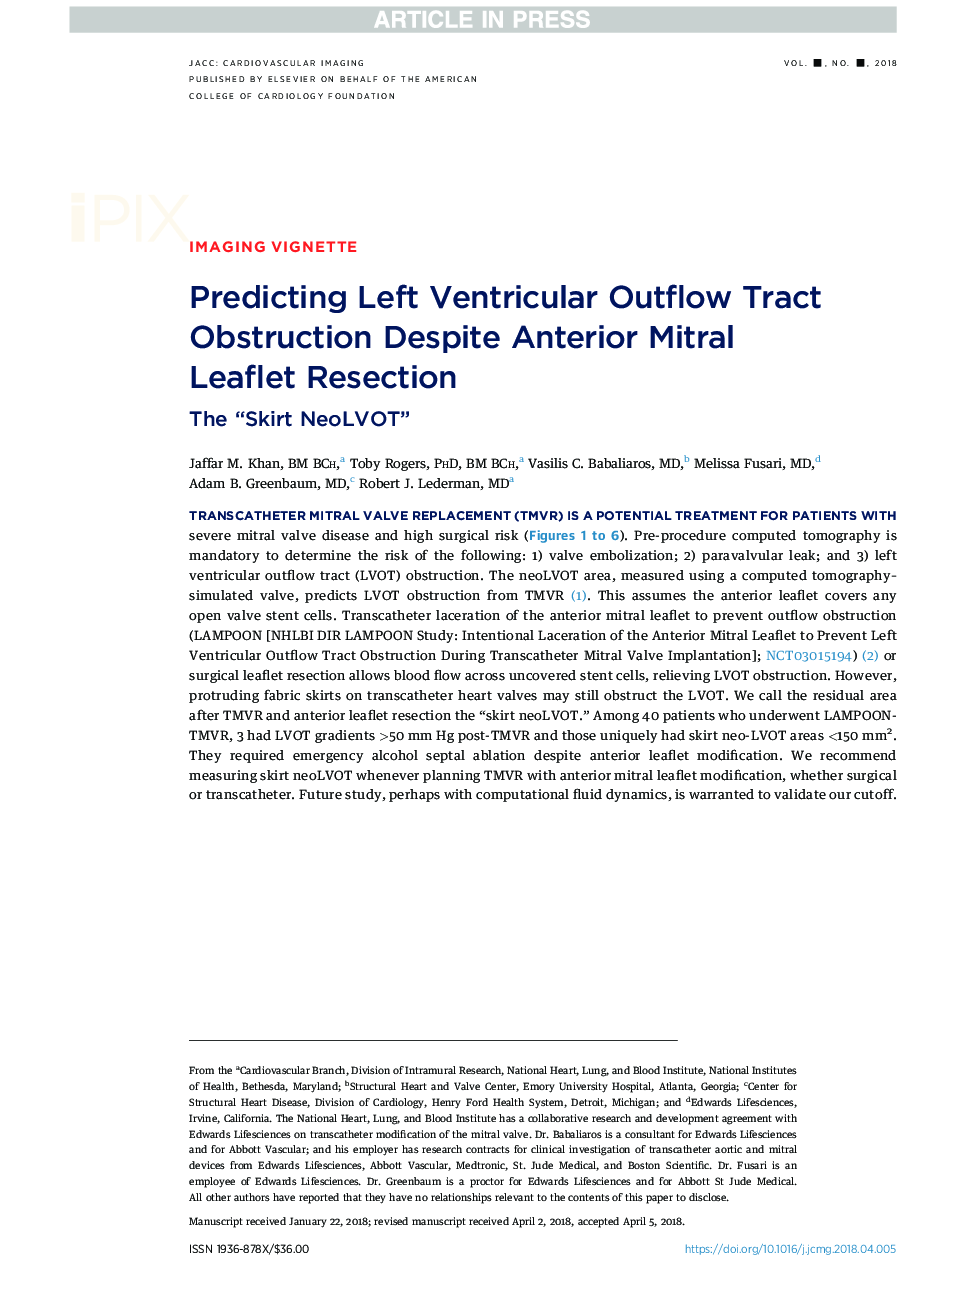 Predicting Left Ventricular Outflow Tract Obstruction Despite Anterior Mitral Leaflet Resection